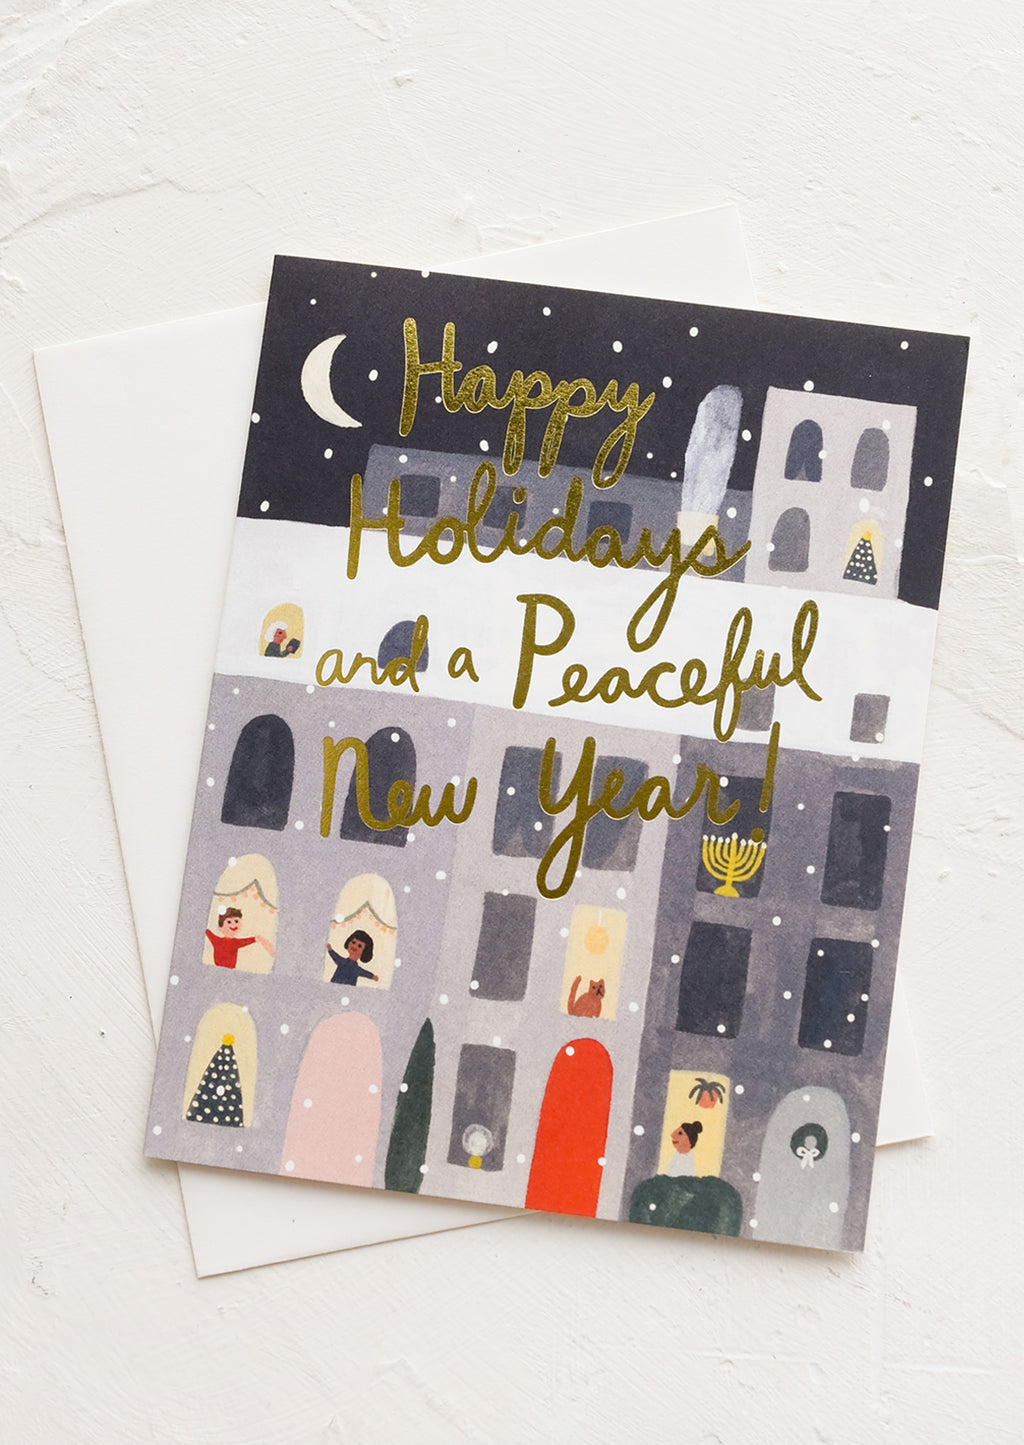 2: An illustrated greeting card featuring apartment building with window scenes.